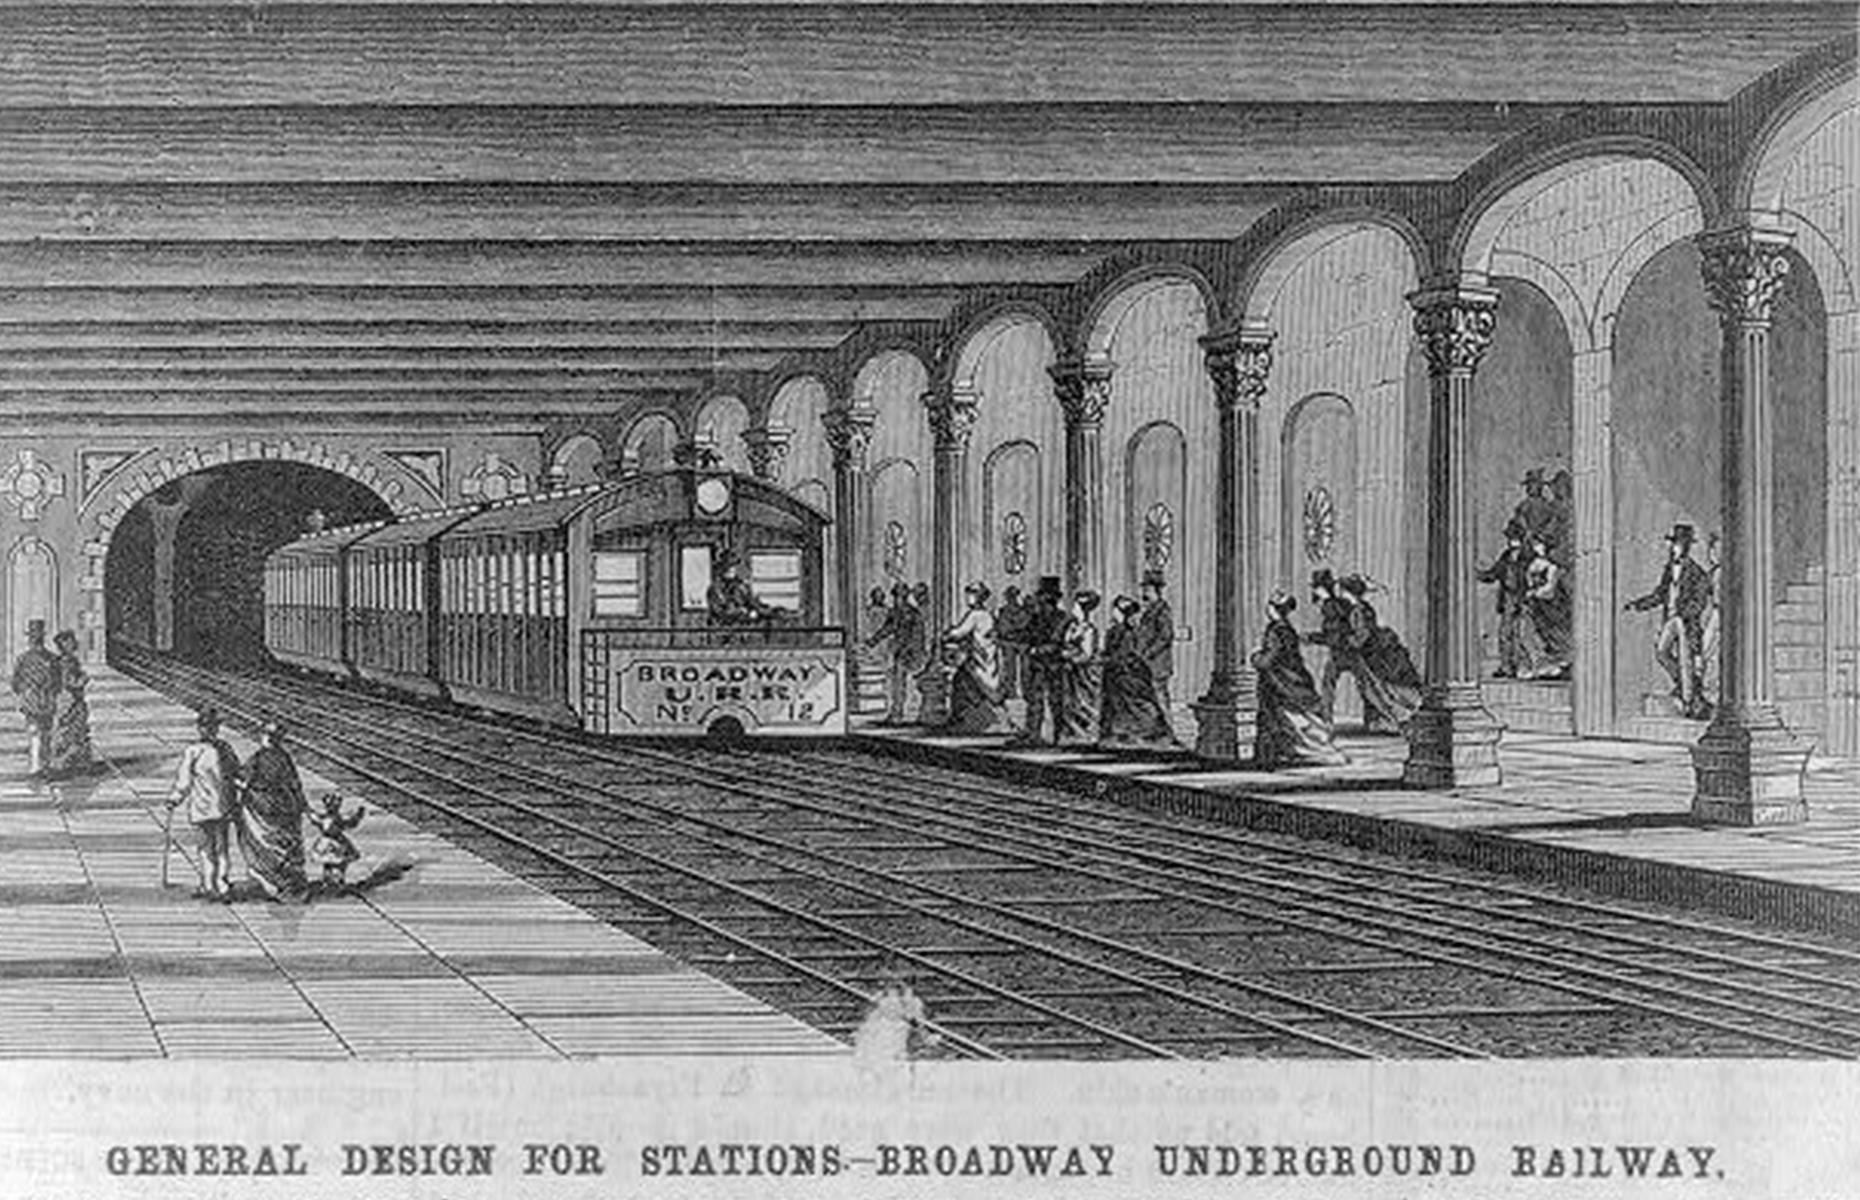 The New York City subway wouldn't open until 1904, but plans were in the mix right back in the 19th century. Drawing inspiration from the London Underground, this image from 1876 shows early designs for the Broadway Underground Railway in the Big Apple. The illustrations depict a grand station with striking arches and Corinthian columns.